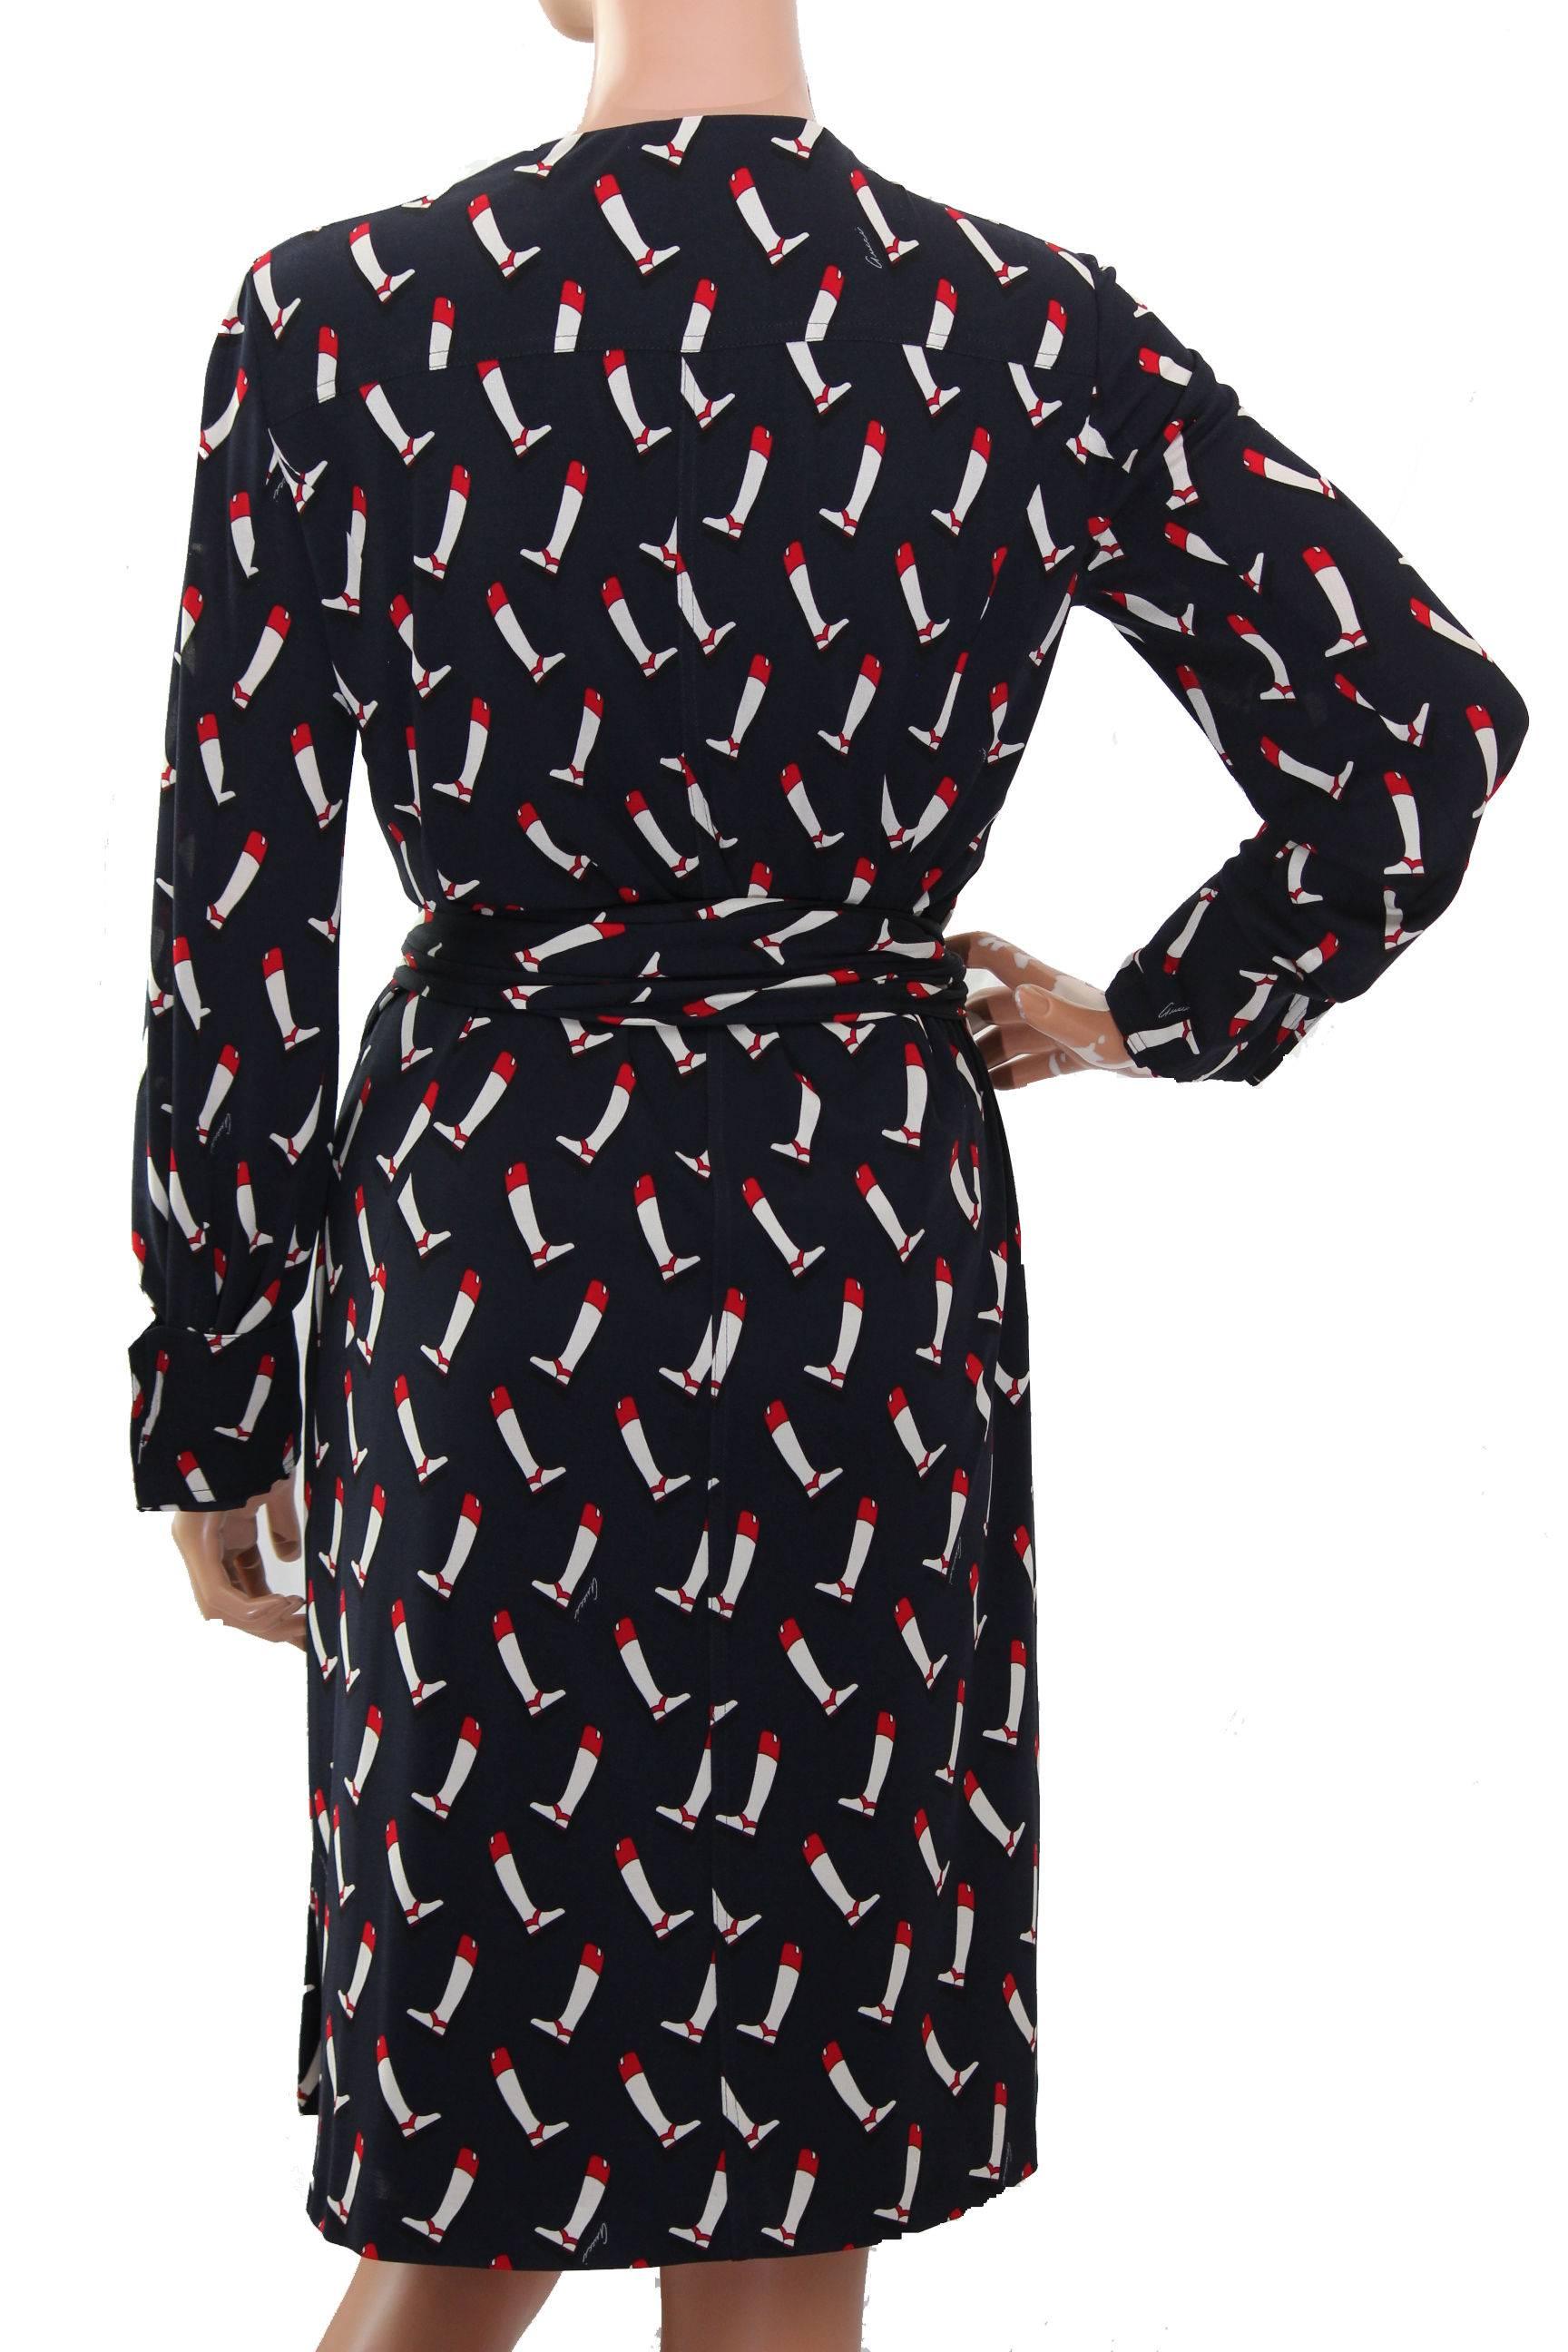 This vintage silk dress was made by Gucci and features a charming equestrian boot print on a navy background! Wrap style, it fastens with buttons and cinches with an attached silk belt and gold-tone metal horse bit closure. 
Lined in lightweight